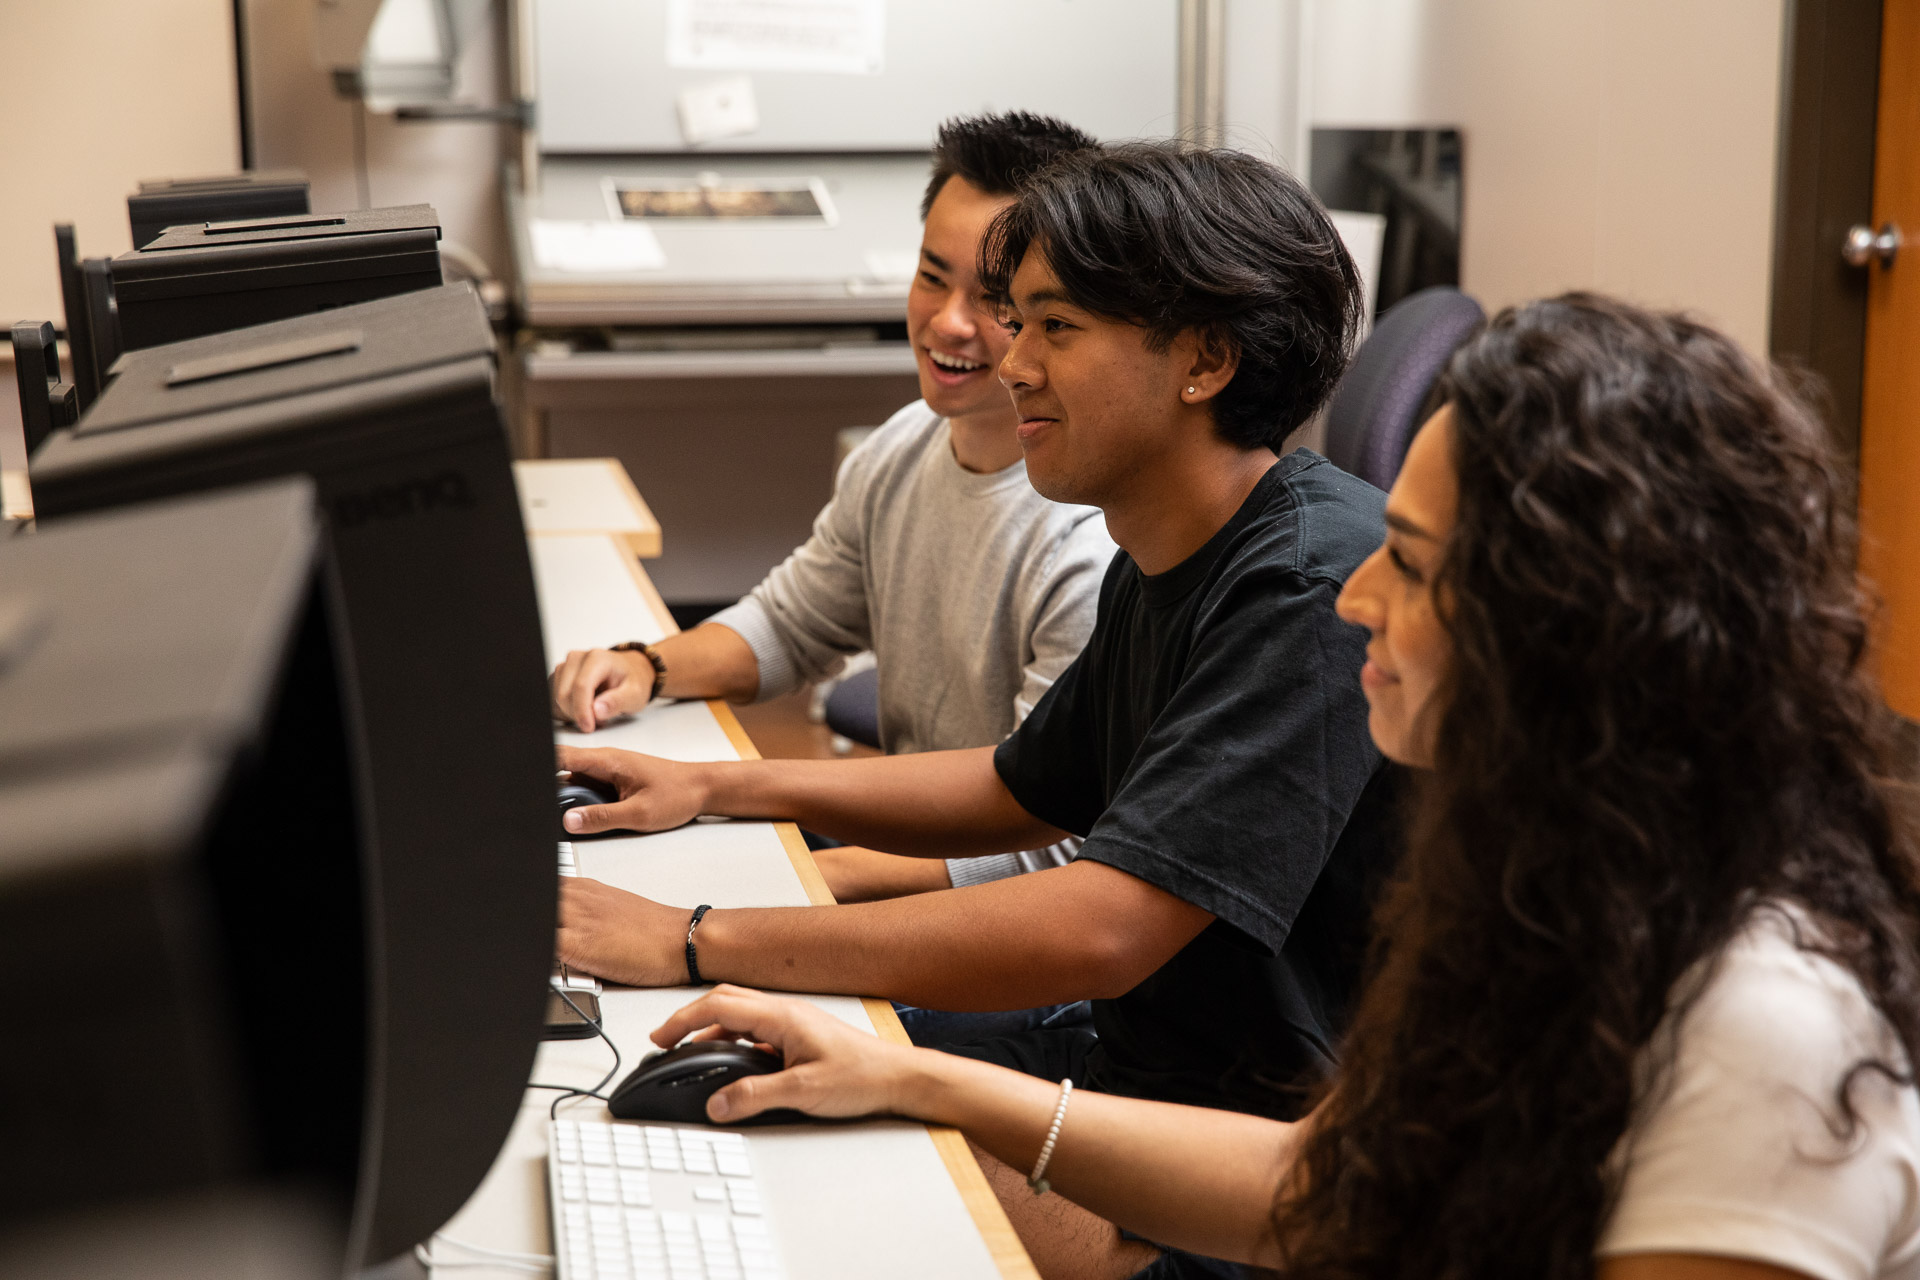 Students in the lab working on computers